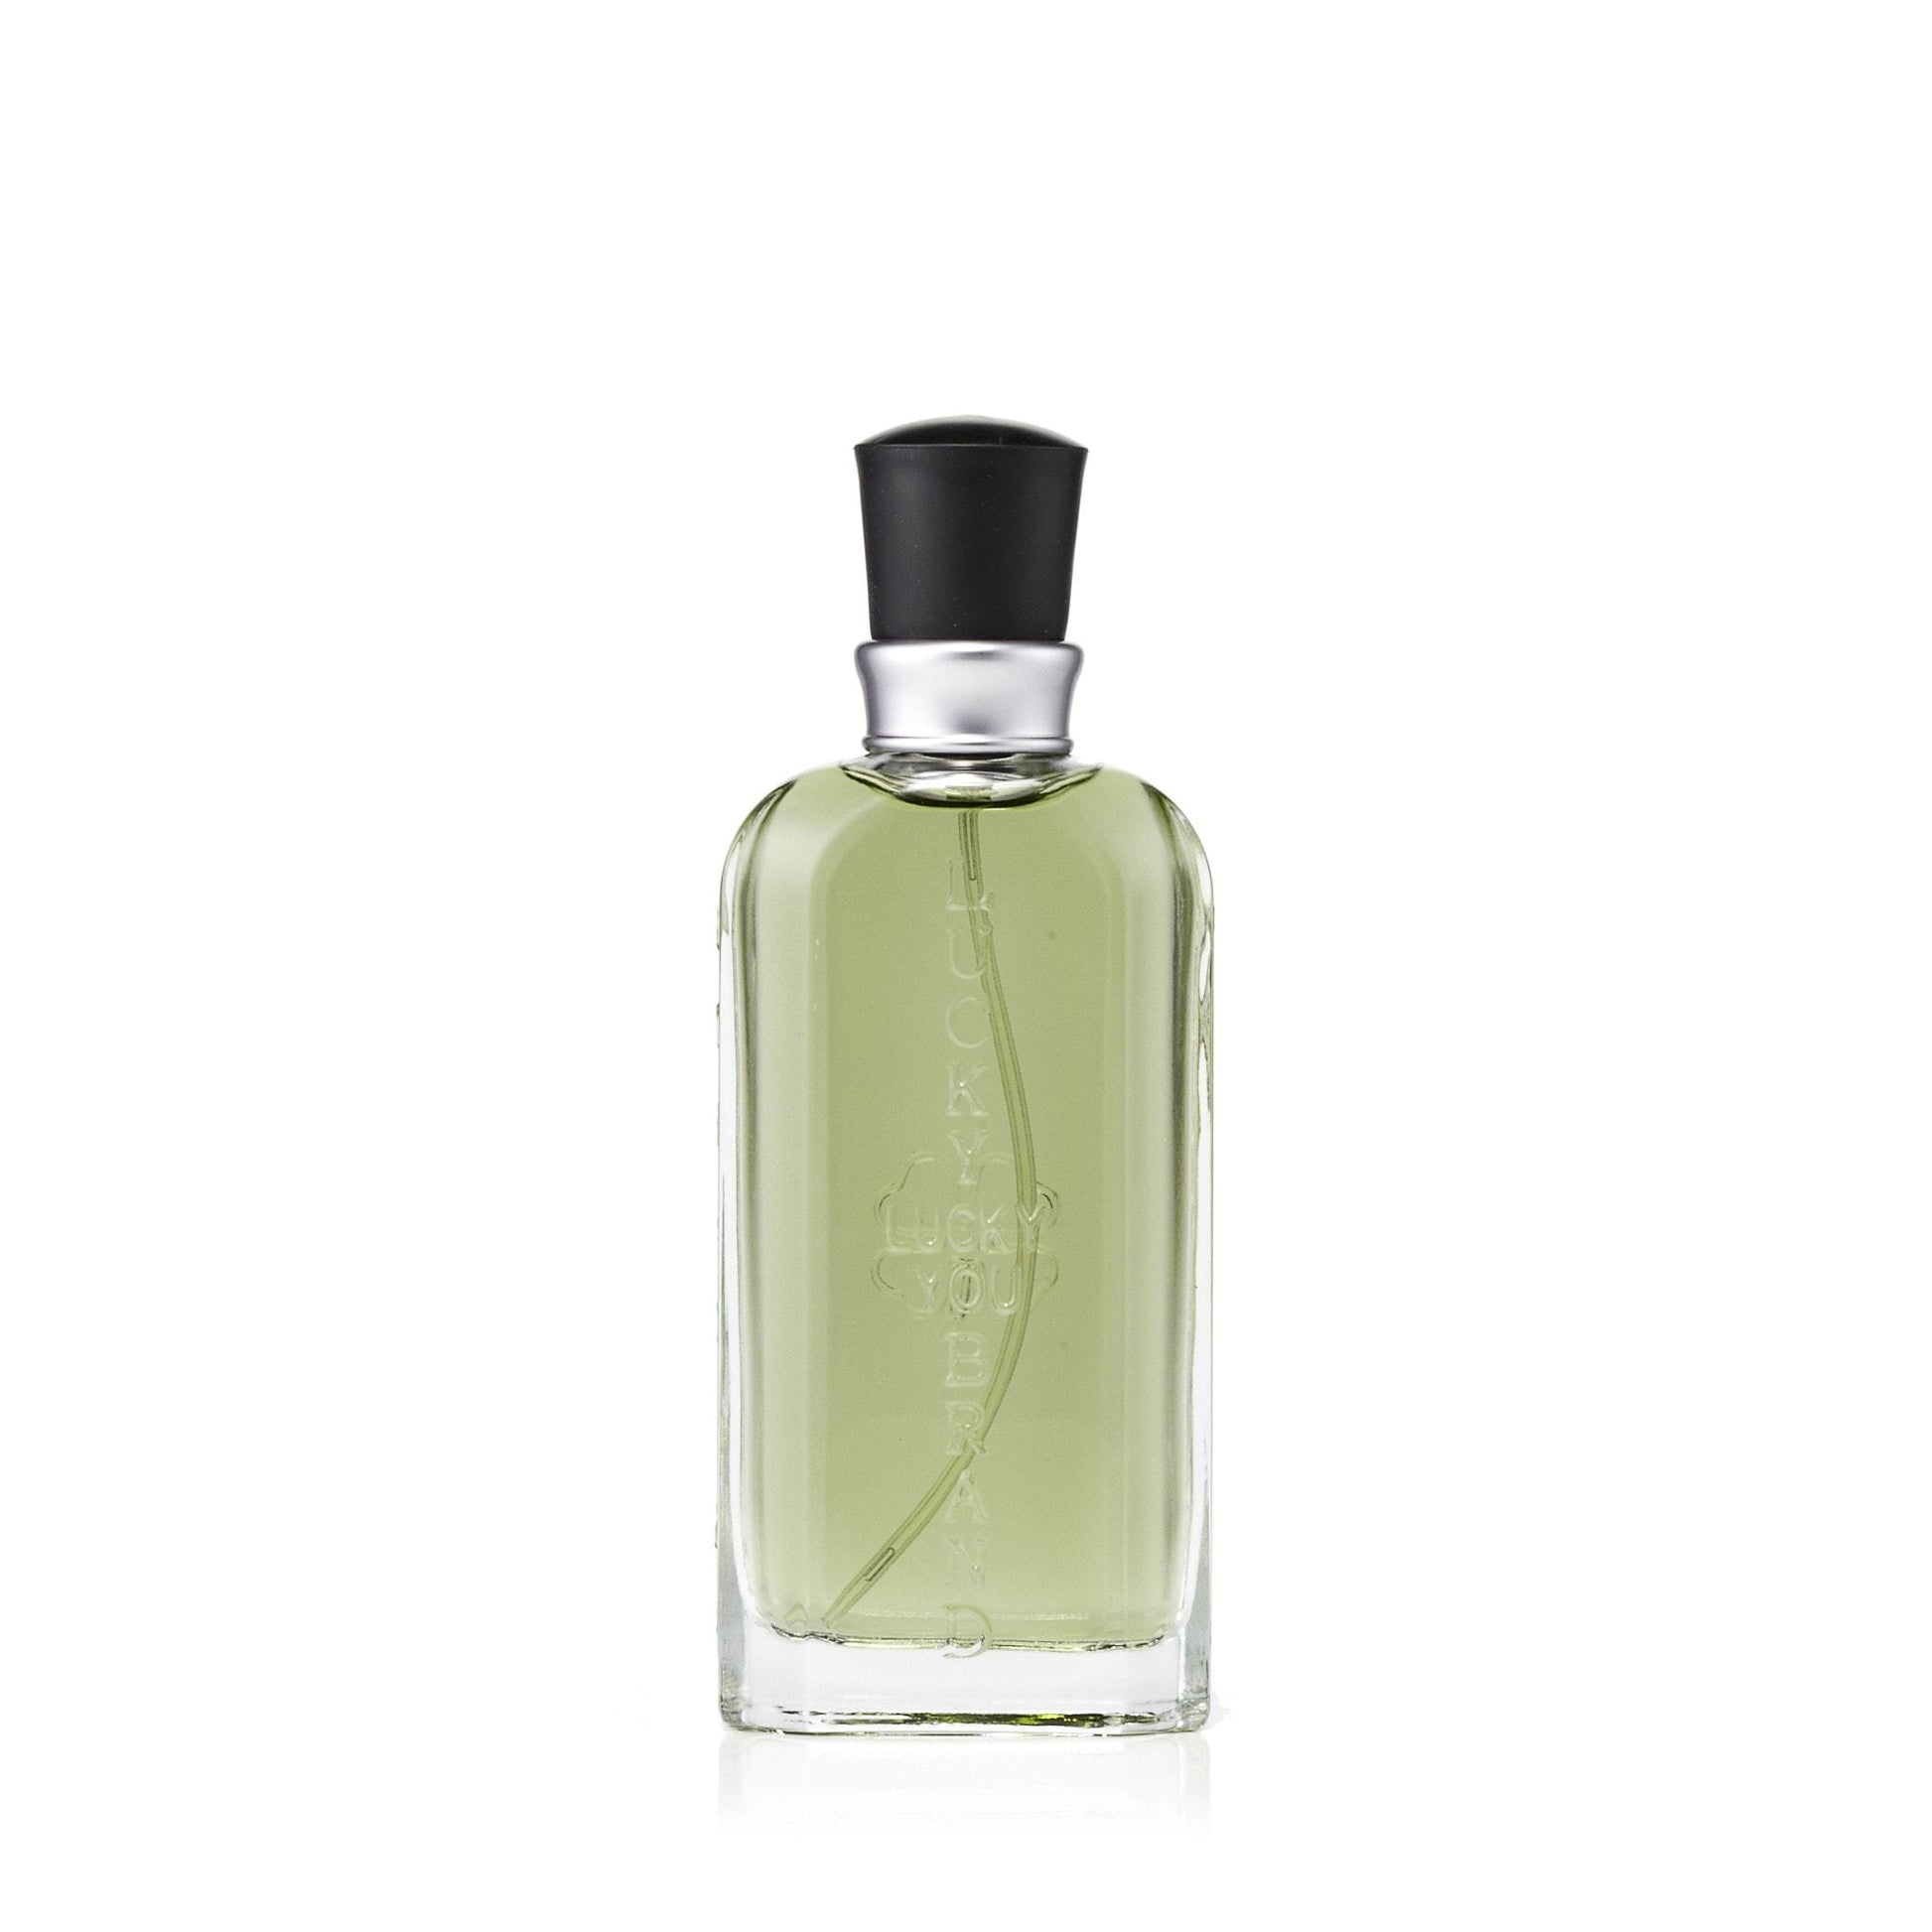 Lucky You Cologne Spray for Men by Claiborne, Product image 1